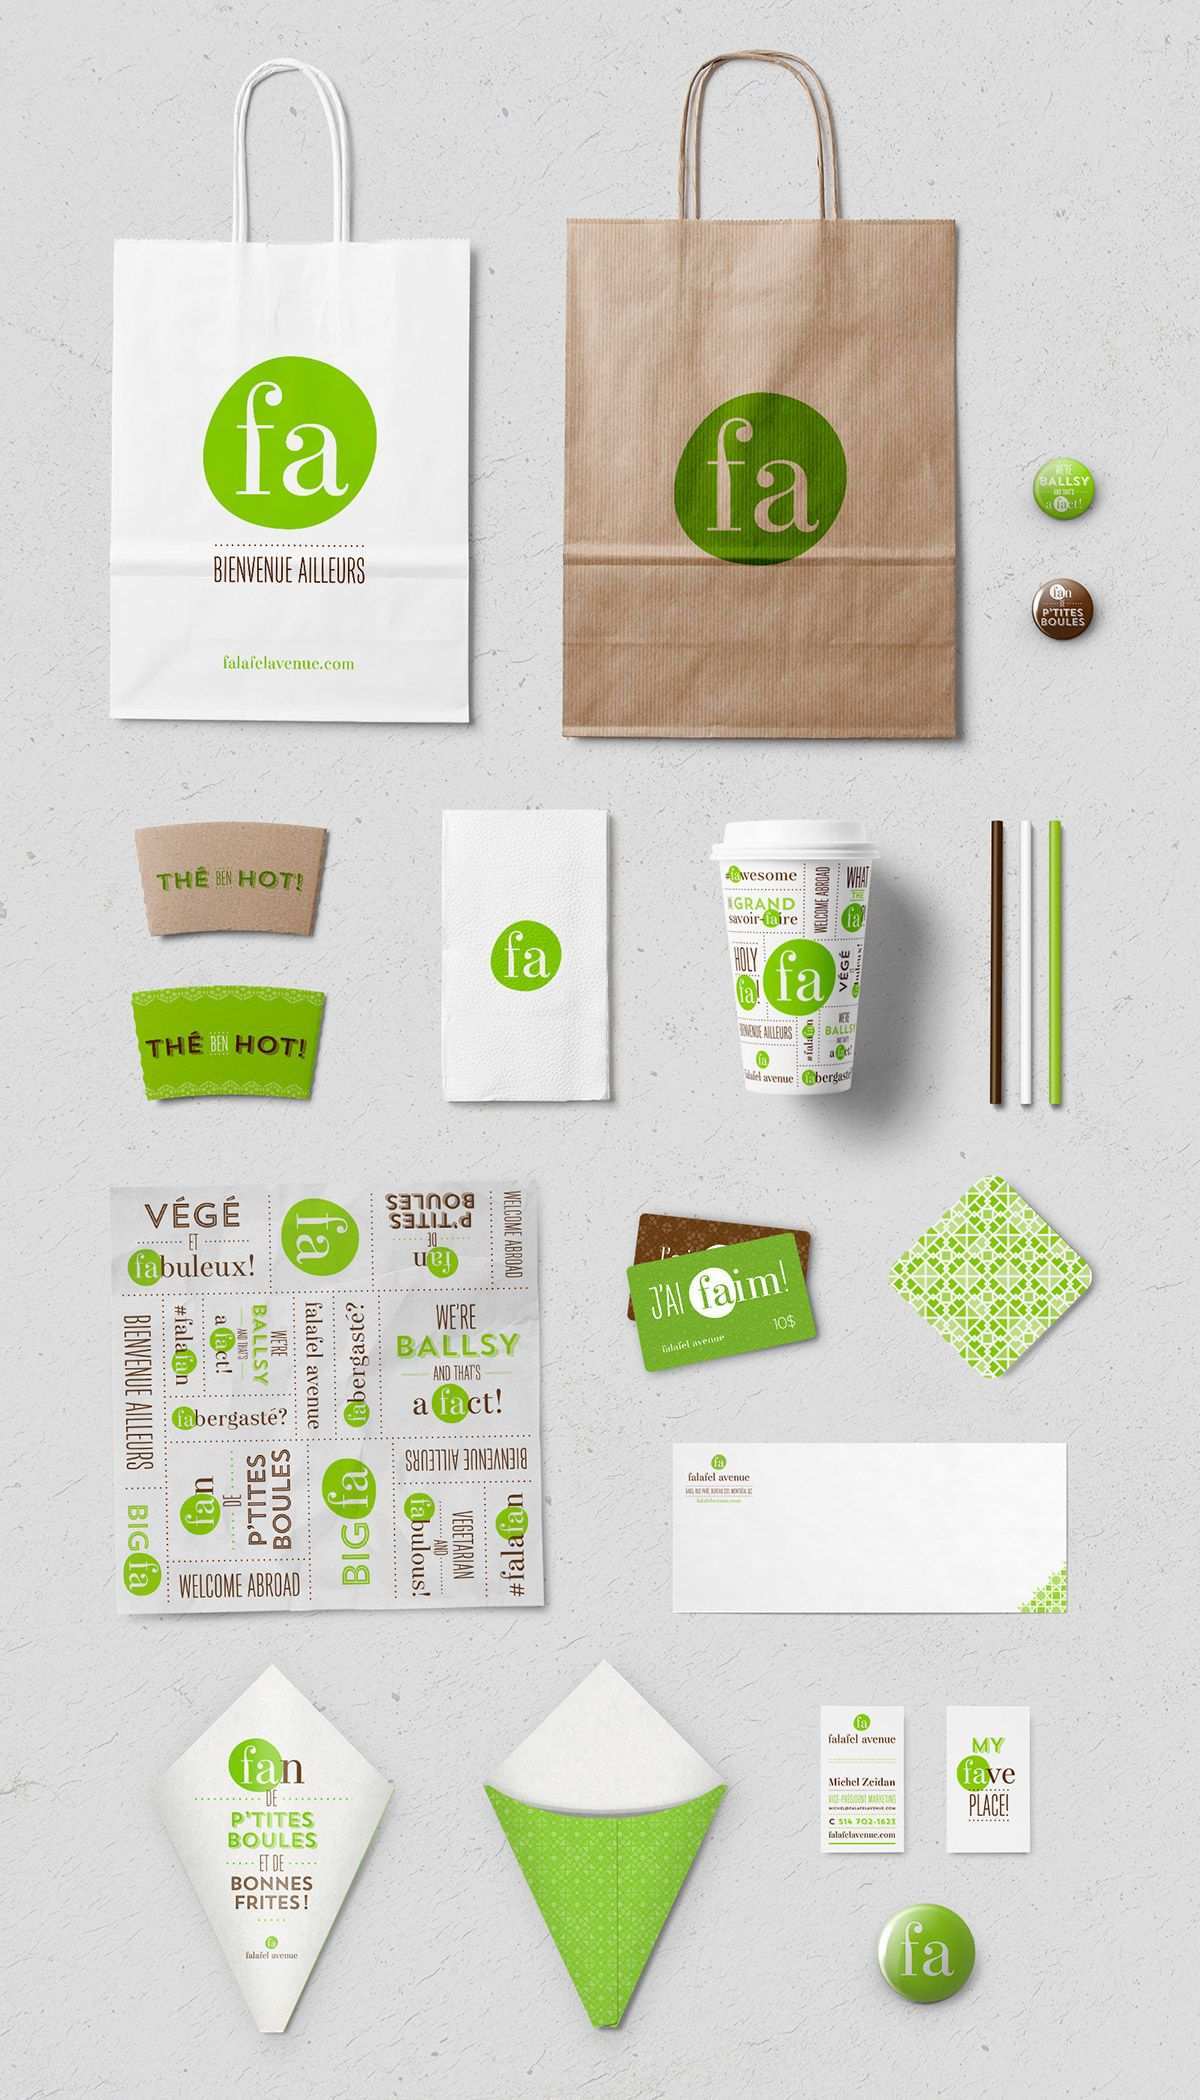 Showcase And Discover Creative Work On The World S Leading Online Platform For Creative Industries Street Food Design Healthy Food Logo Food Branding